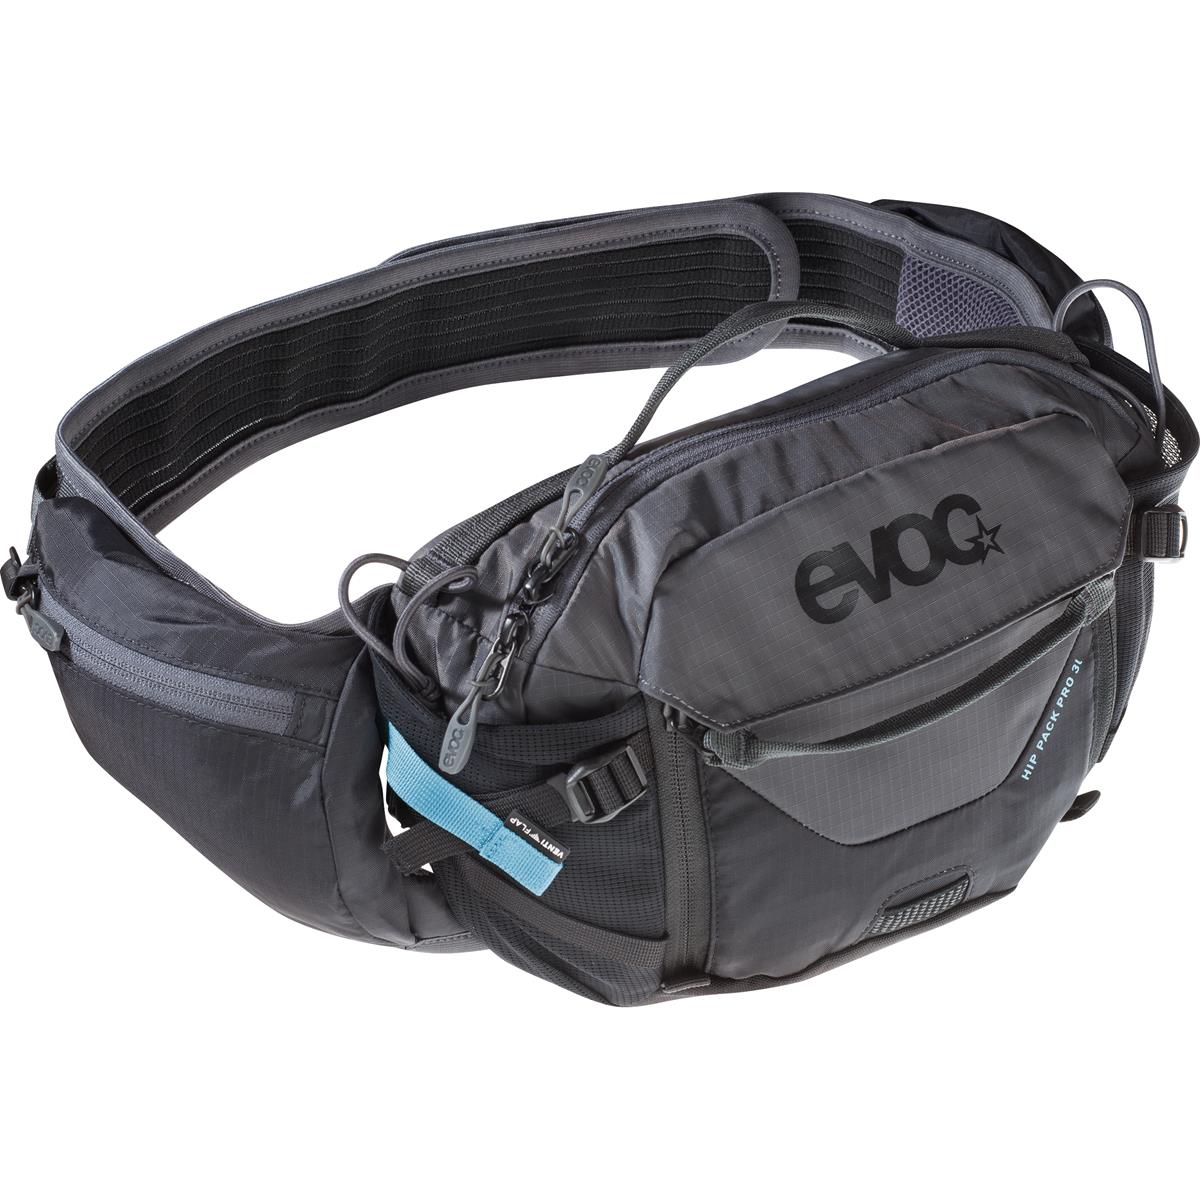 Evoc Hip Pack with Hydration System Hip Pack Pro 3 Black/Carbon Gray